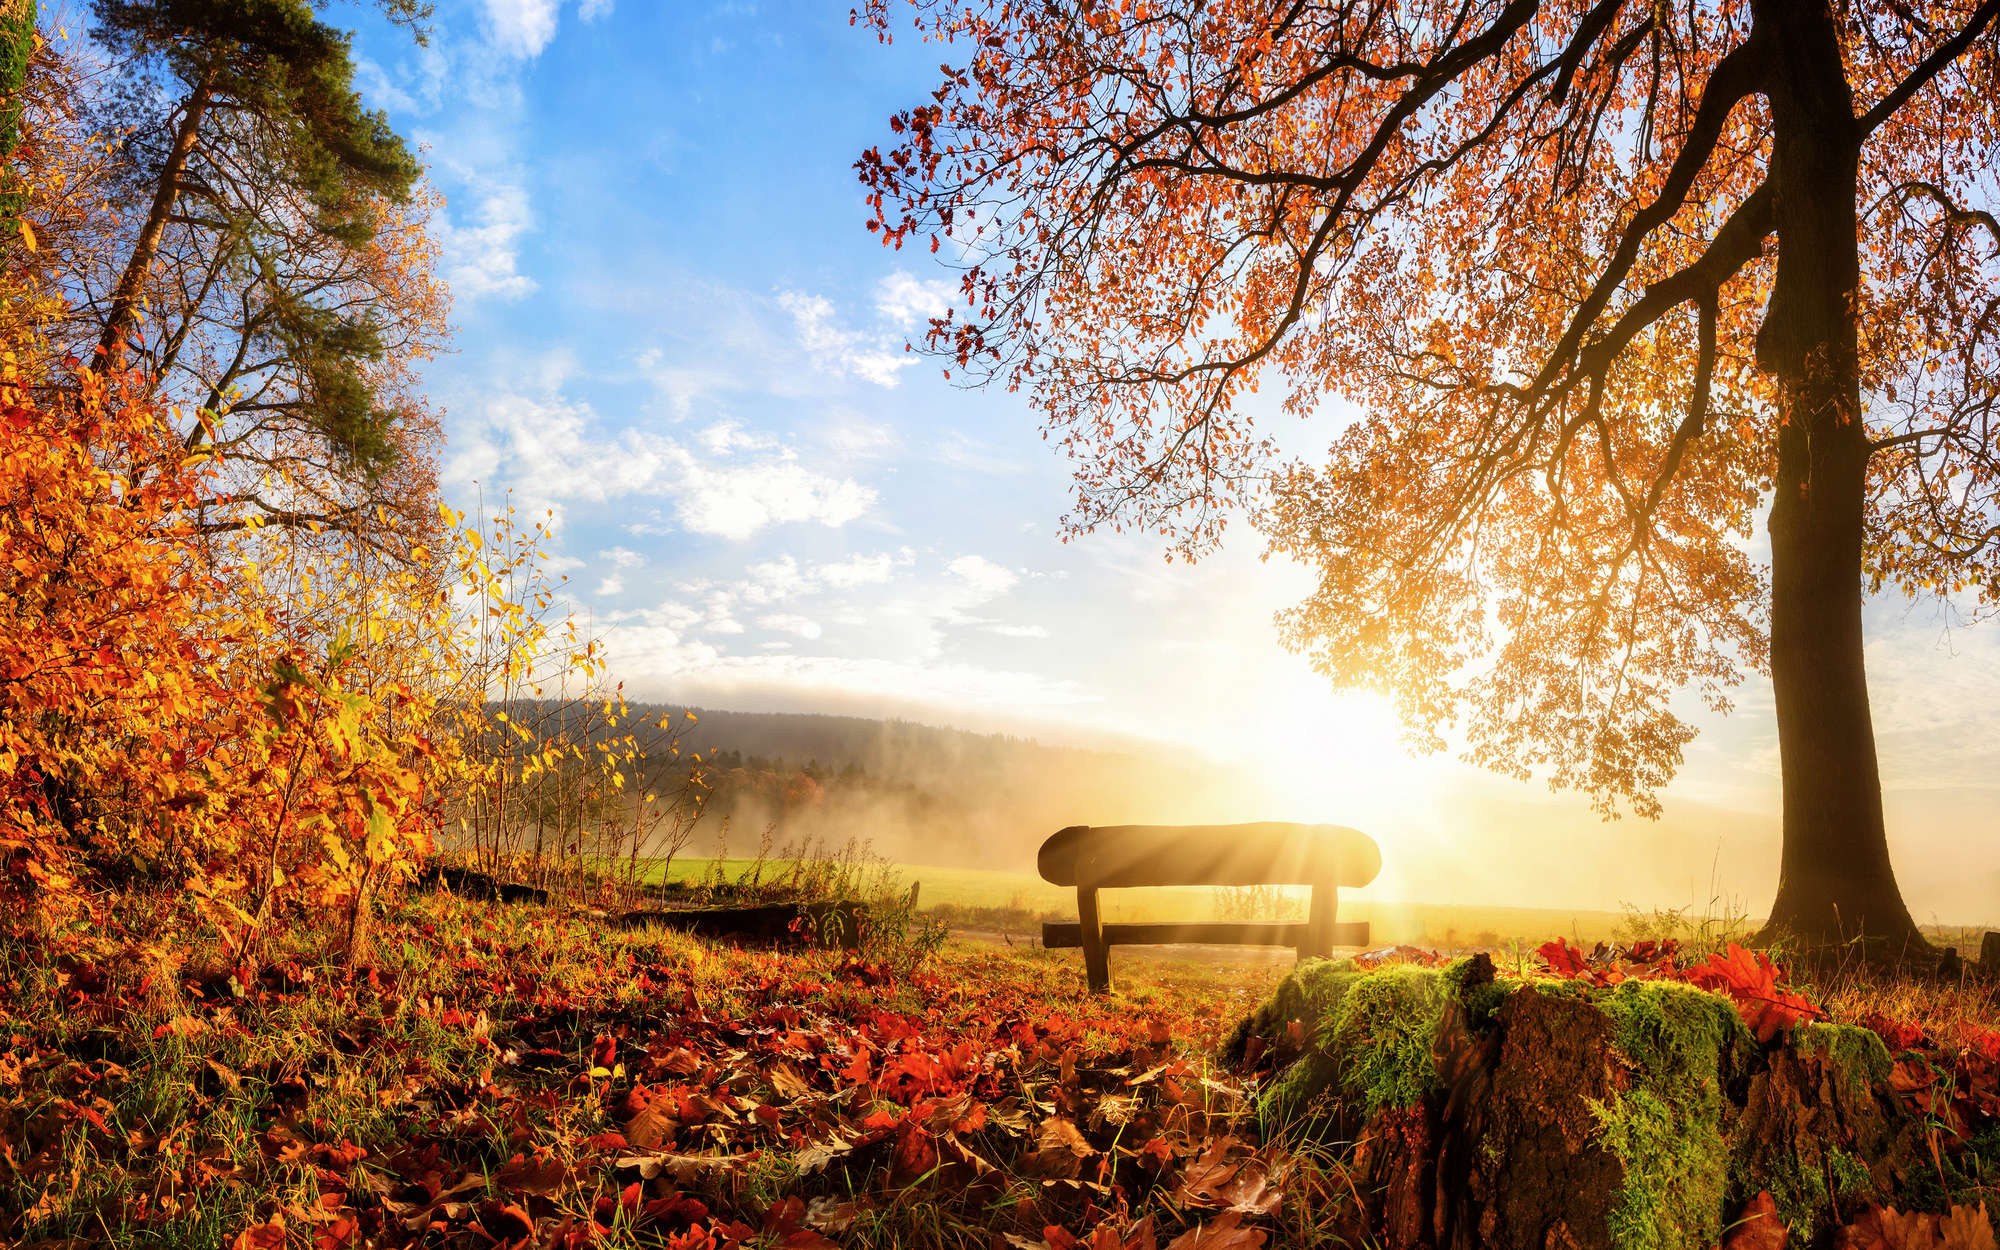             Photo wallpaper Bench in the Forest on an Autumn Morning - Textured non-woven
        